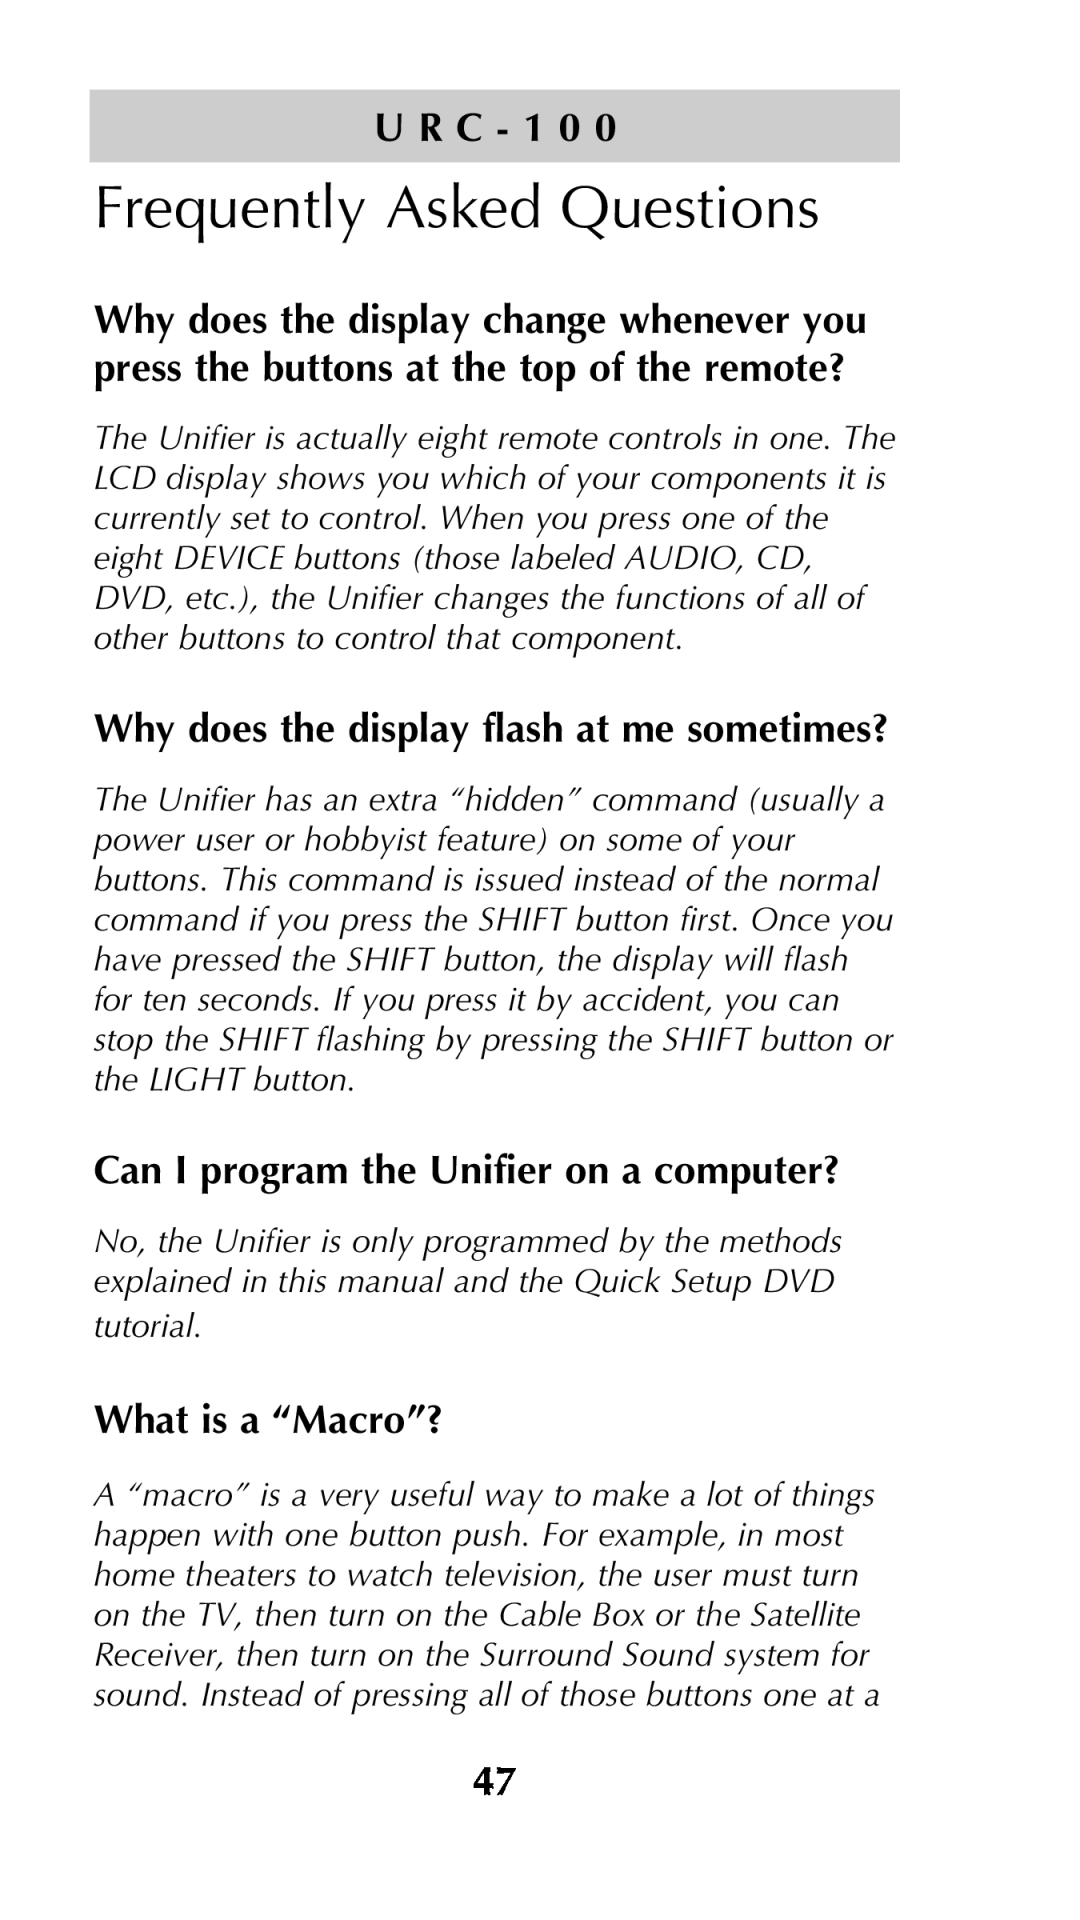 Universal Remote Control Unifier URC-100 Frequently Asked Questions, Why does the display flash at me sometimes? 